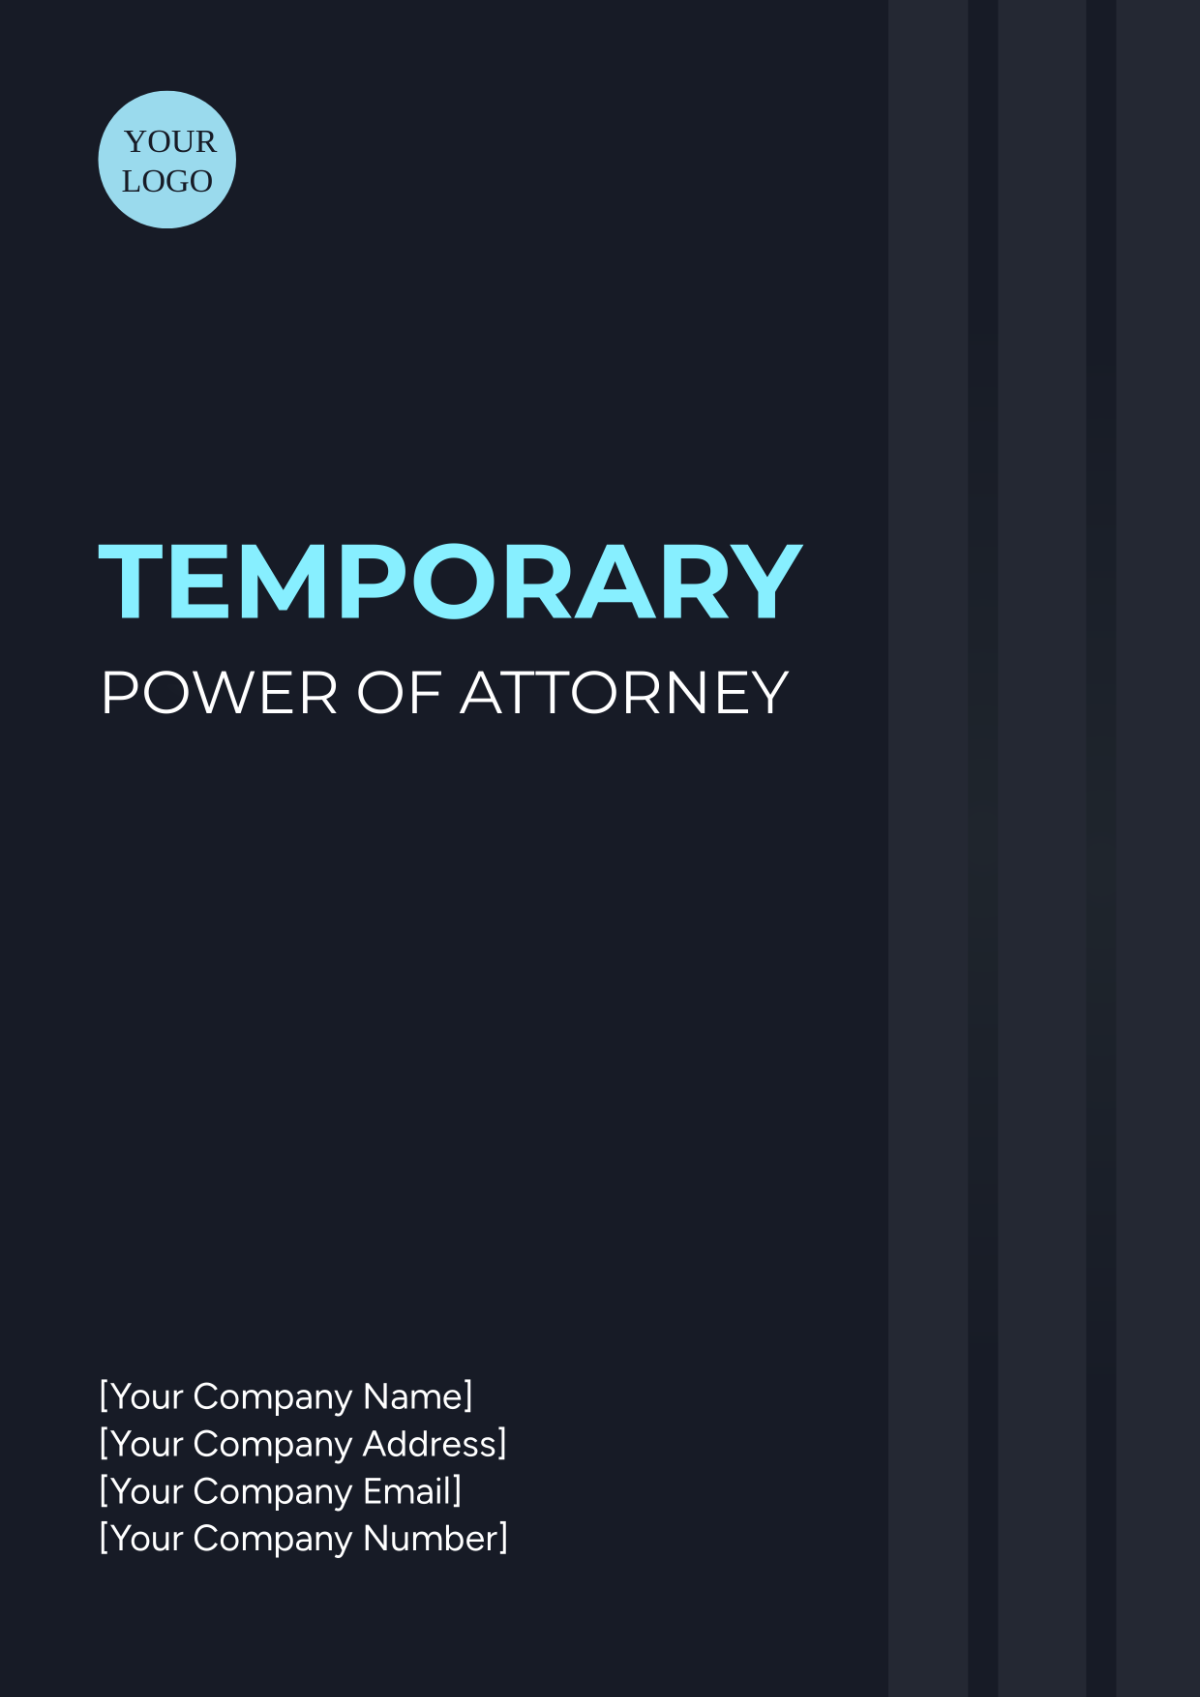 Temporary Power of Attorney Cover Page